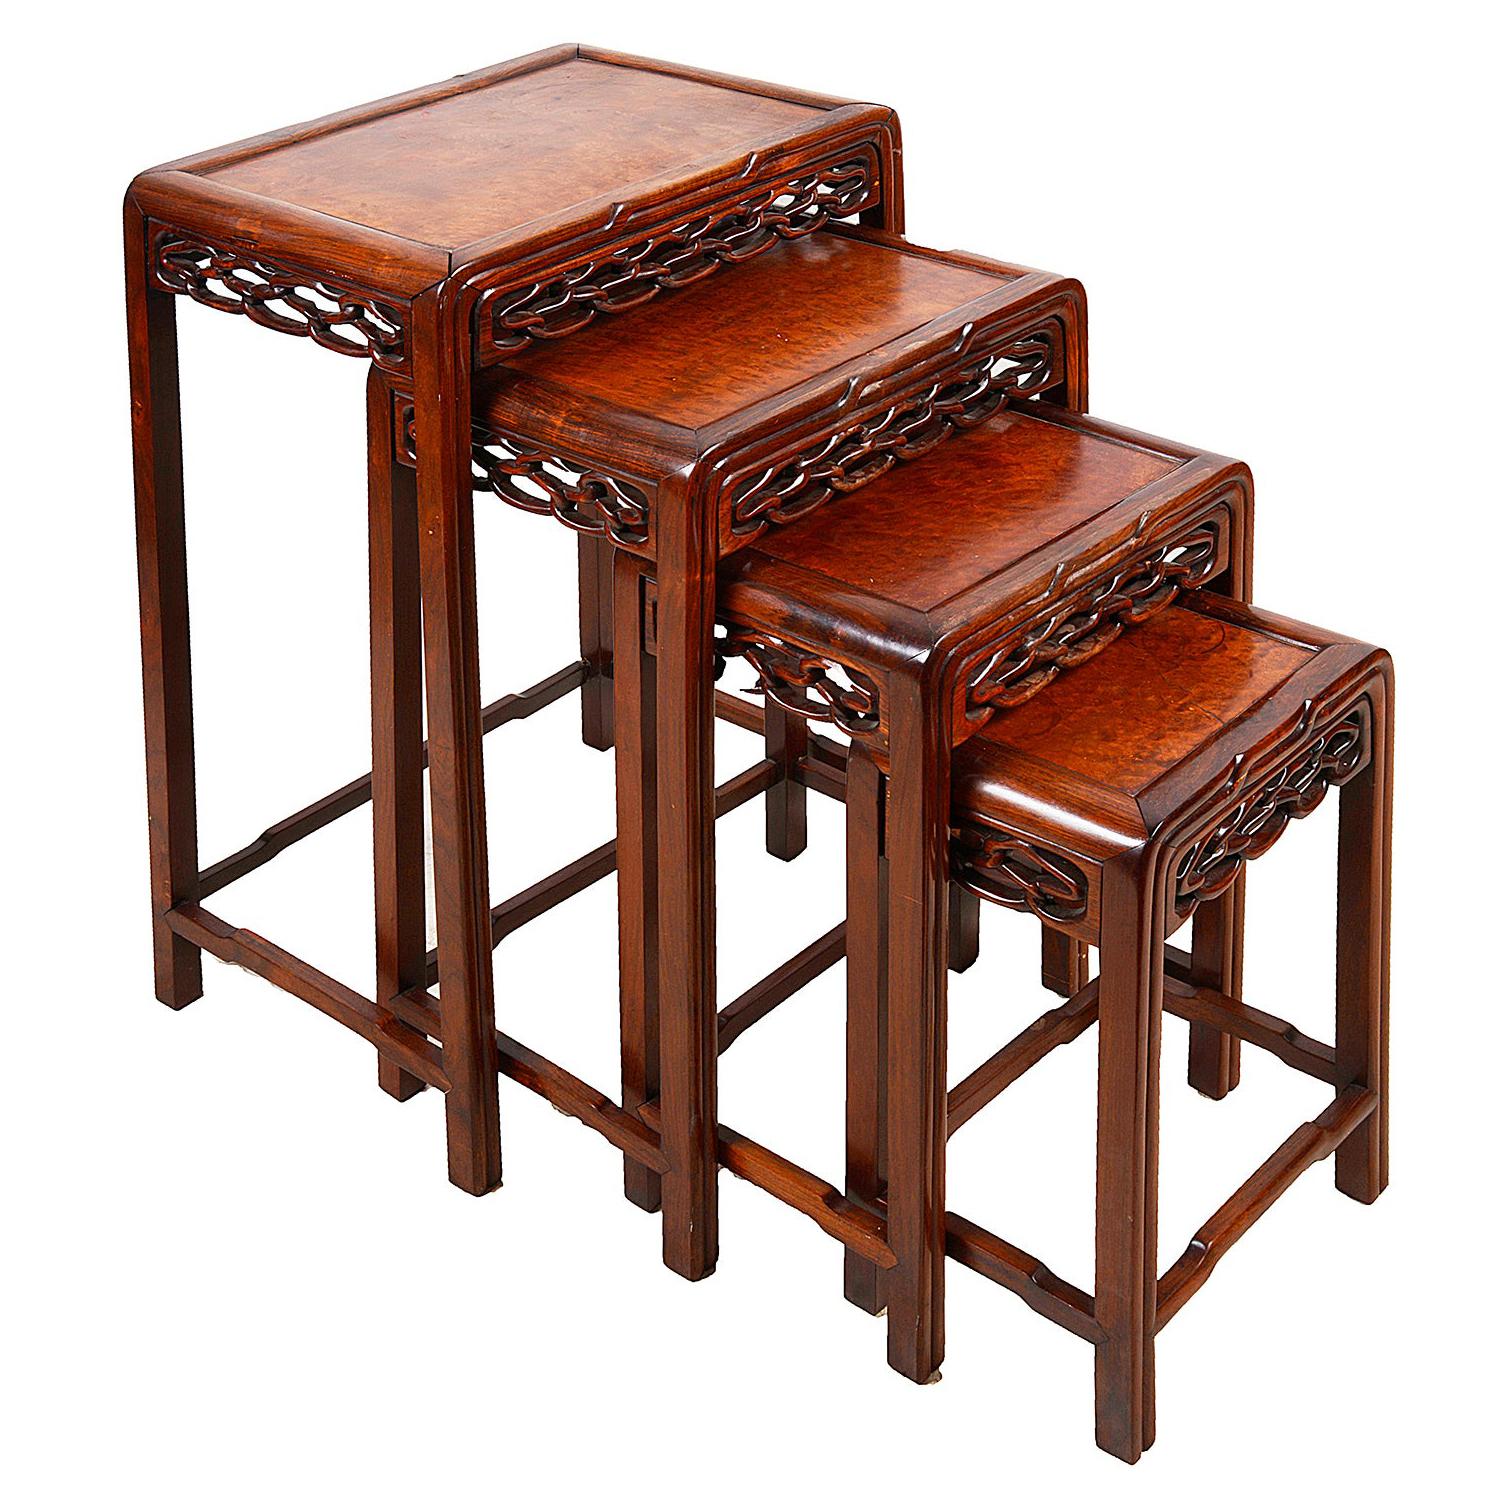 Nest of Four Chinese Hardwood Tables, 19th Century For Sale